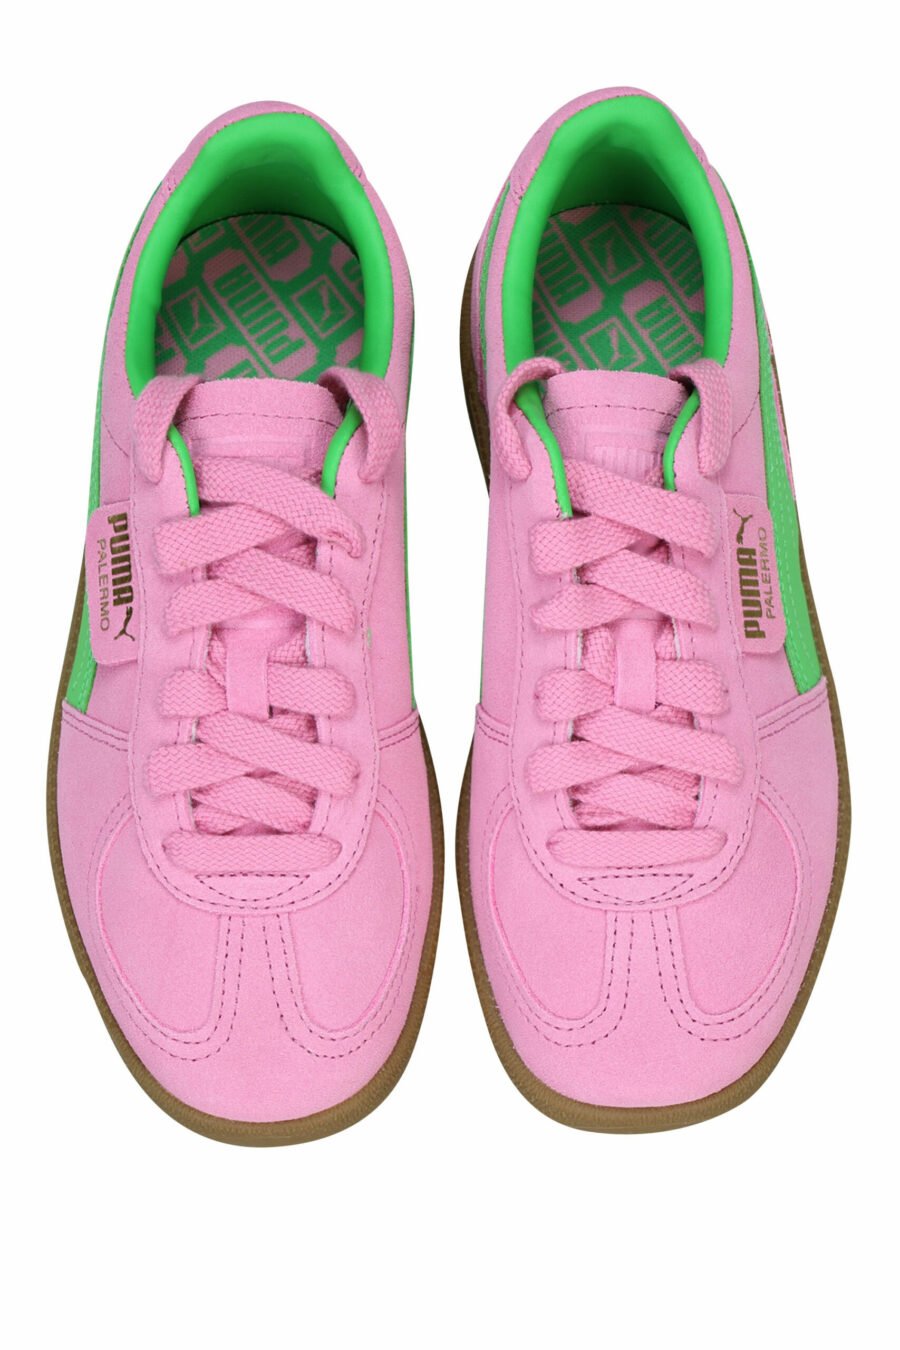 Trainers "palermo" fuchsia with green - 4099685699247 4 scaled